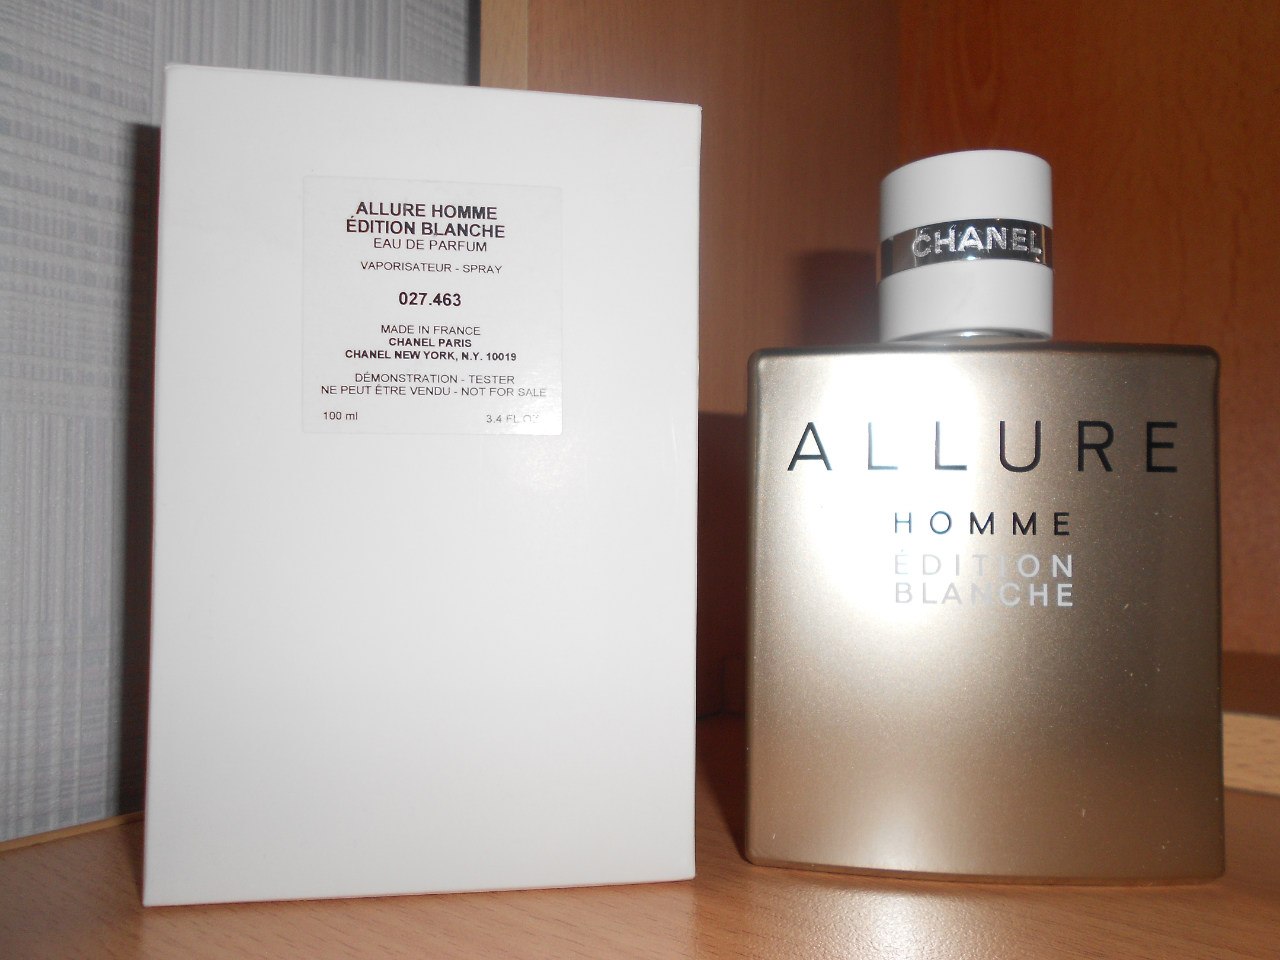 Chanel homme blanche. Chanel Allure Edition Blanche 50ml (m). Chanel Allure Edition Blanche men 50ml EDP. Chanel Allure 50ml (m). Chanel Allure homme Edition Blanche m 100 ml EDP.